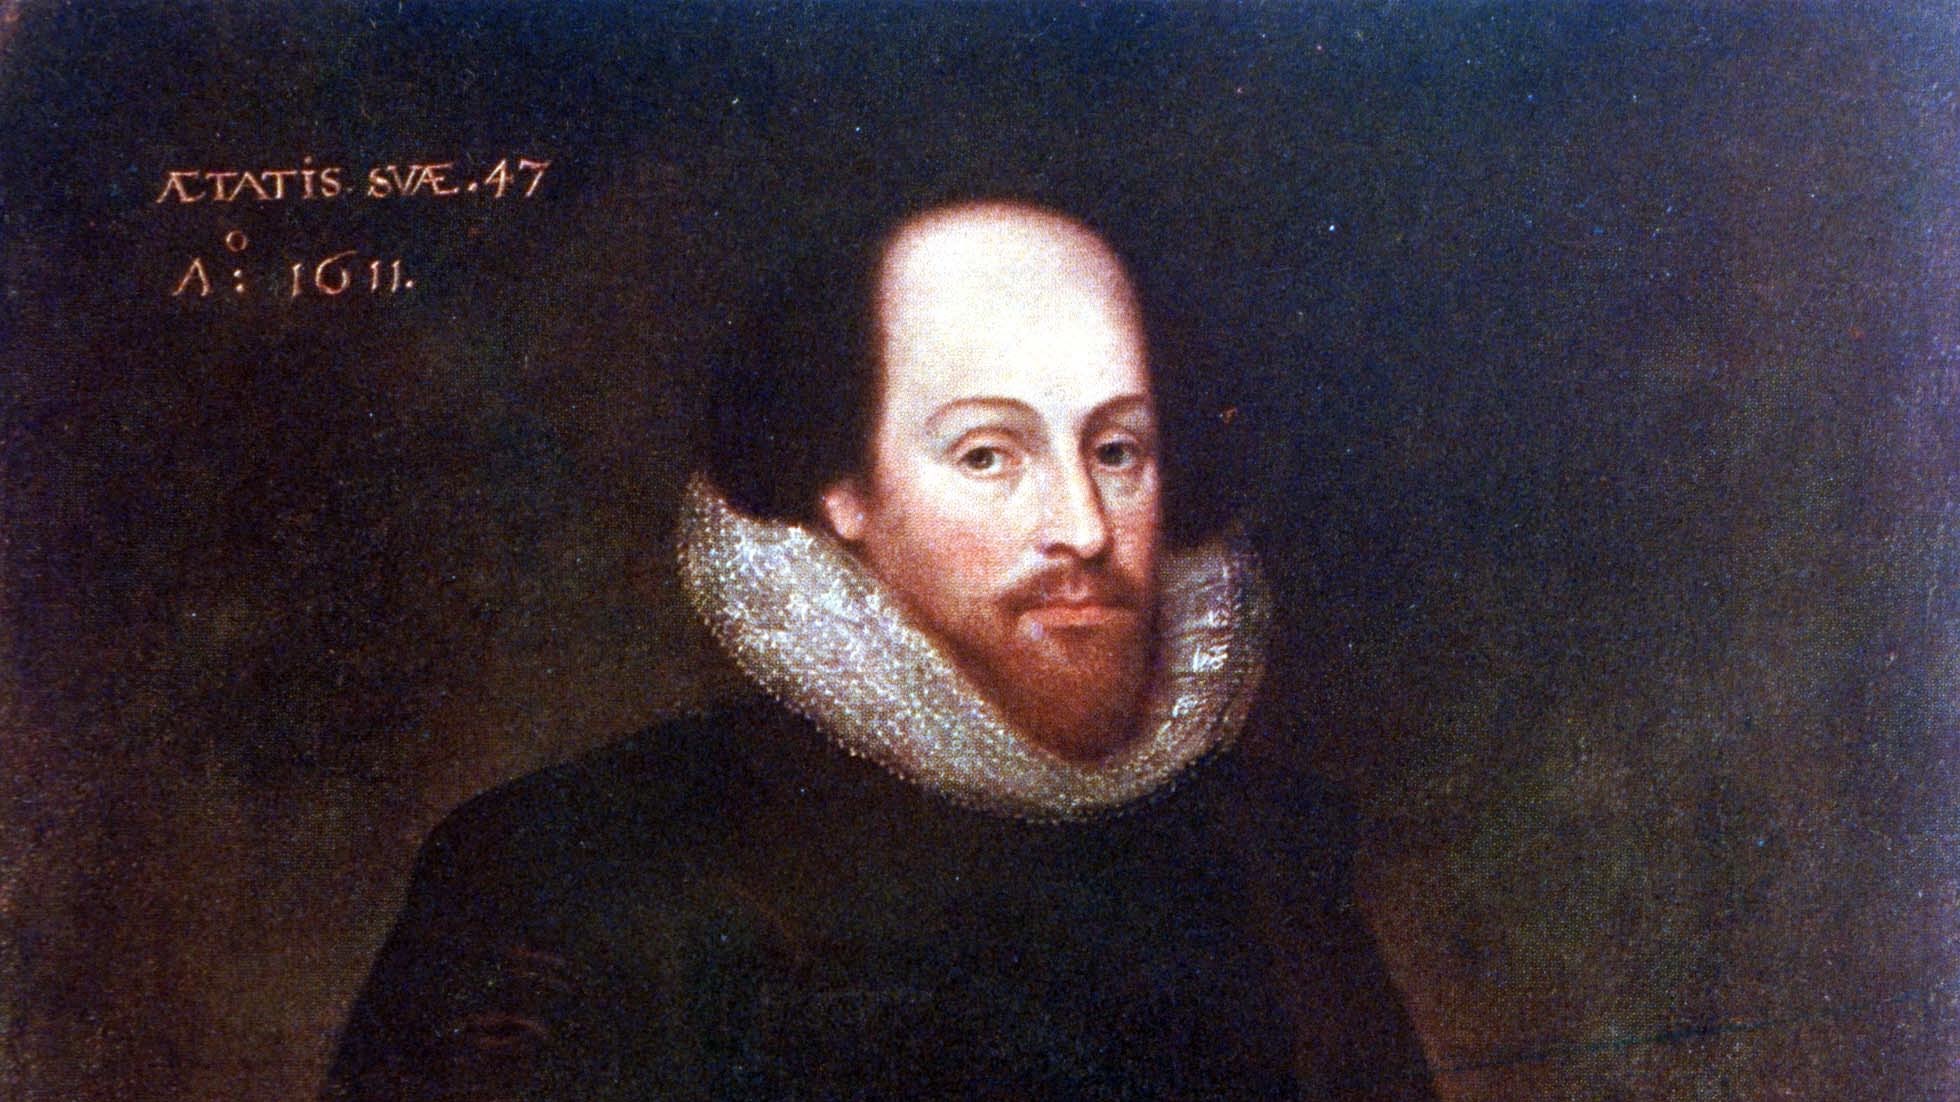 10 Things You Didn’t Know About William Shakespeare